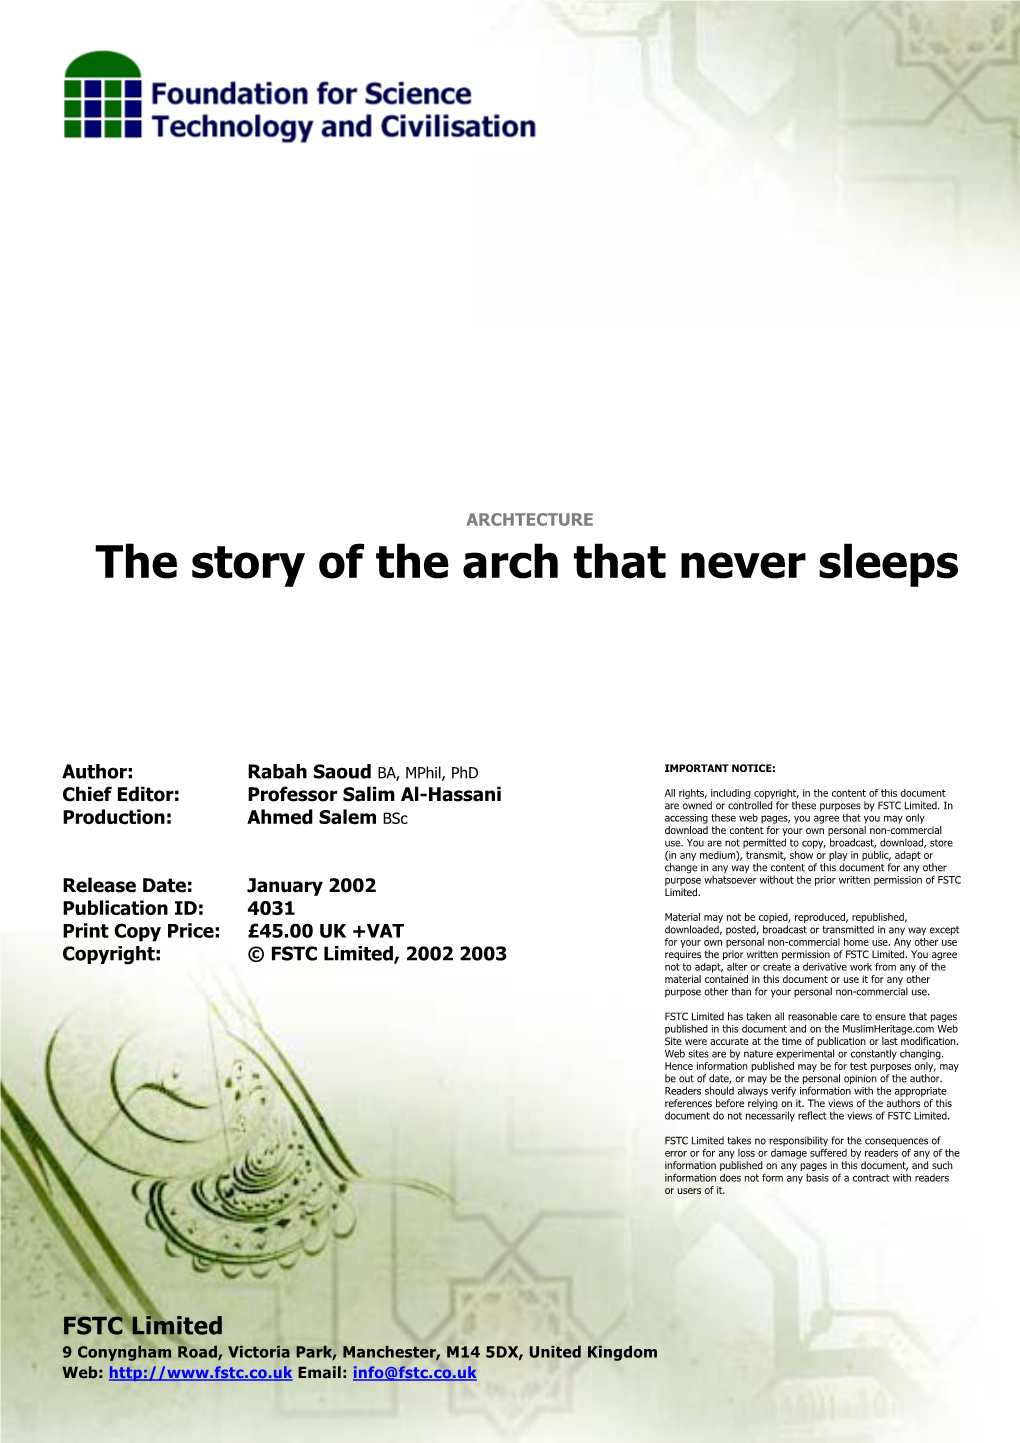 The Story of the Arch That Never Sleeps